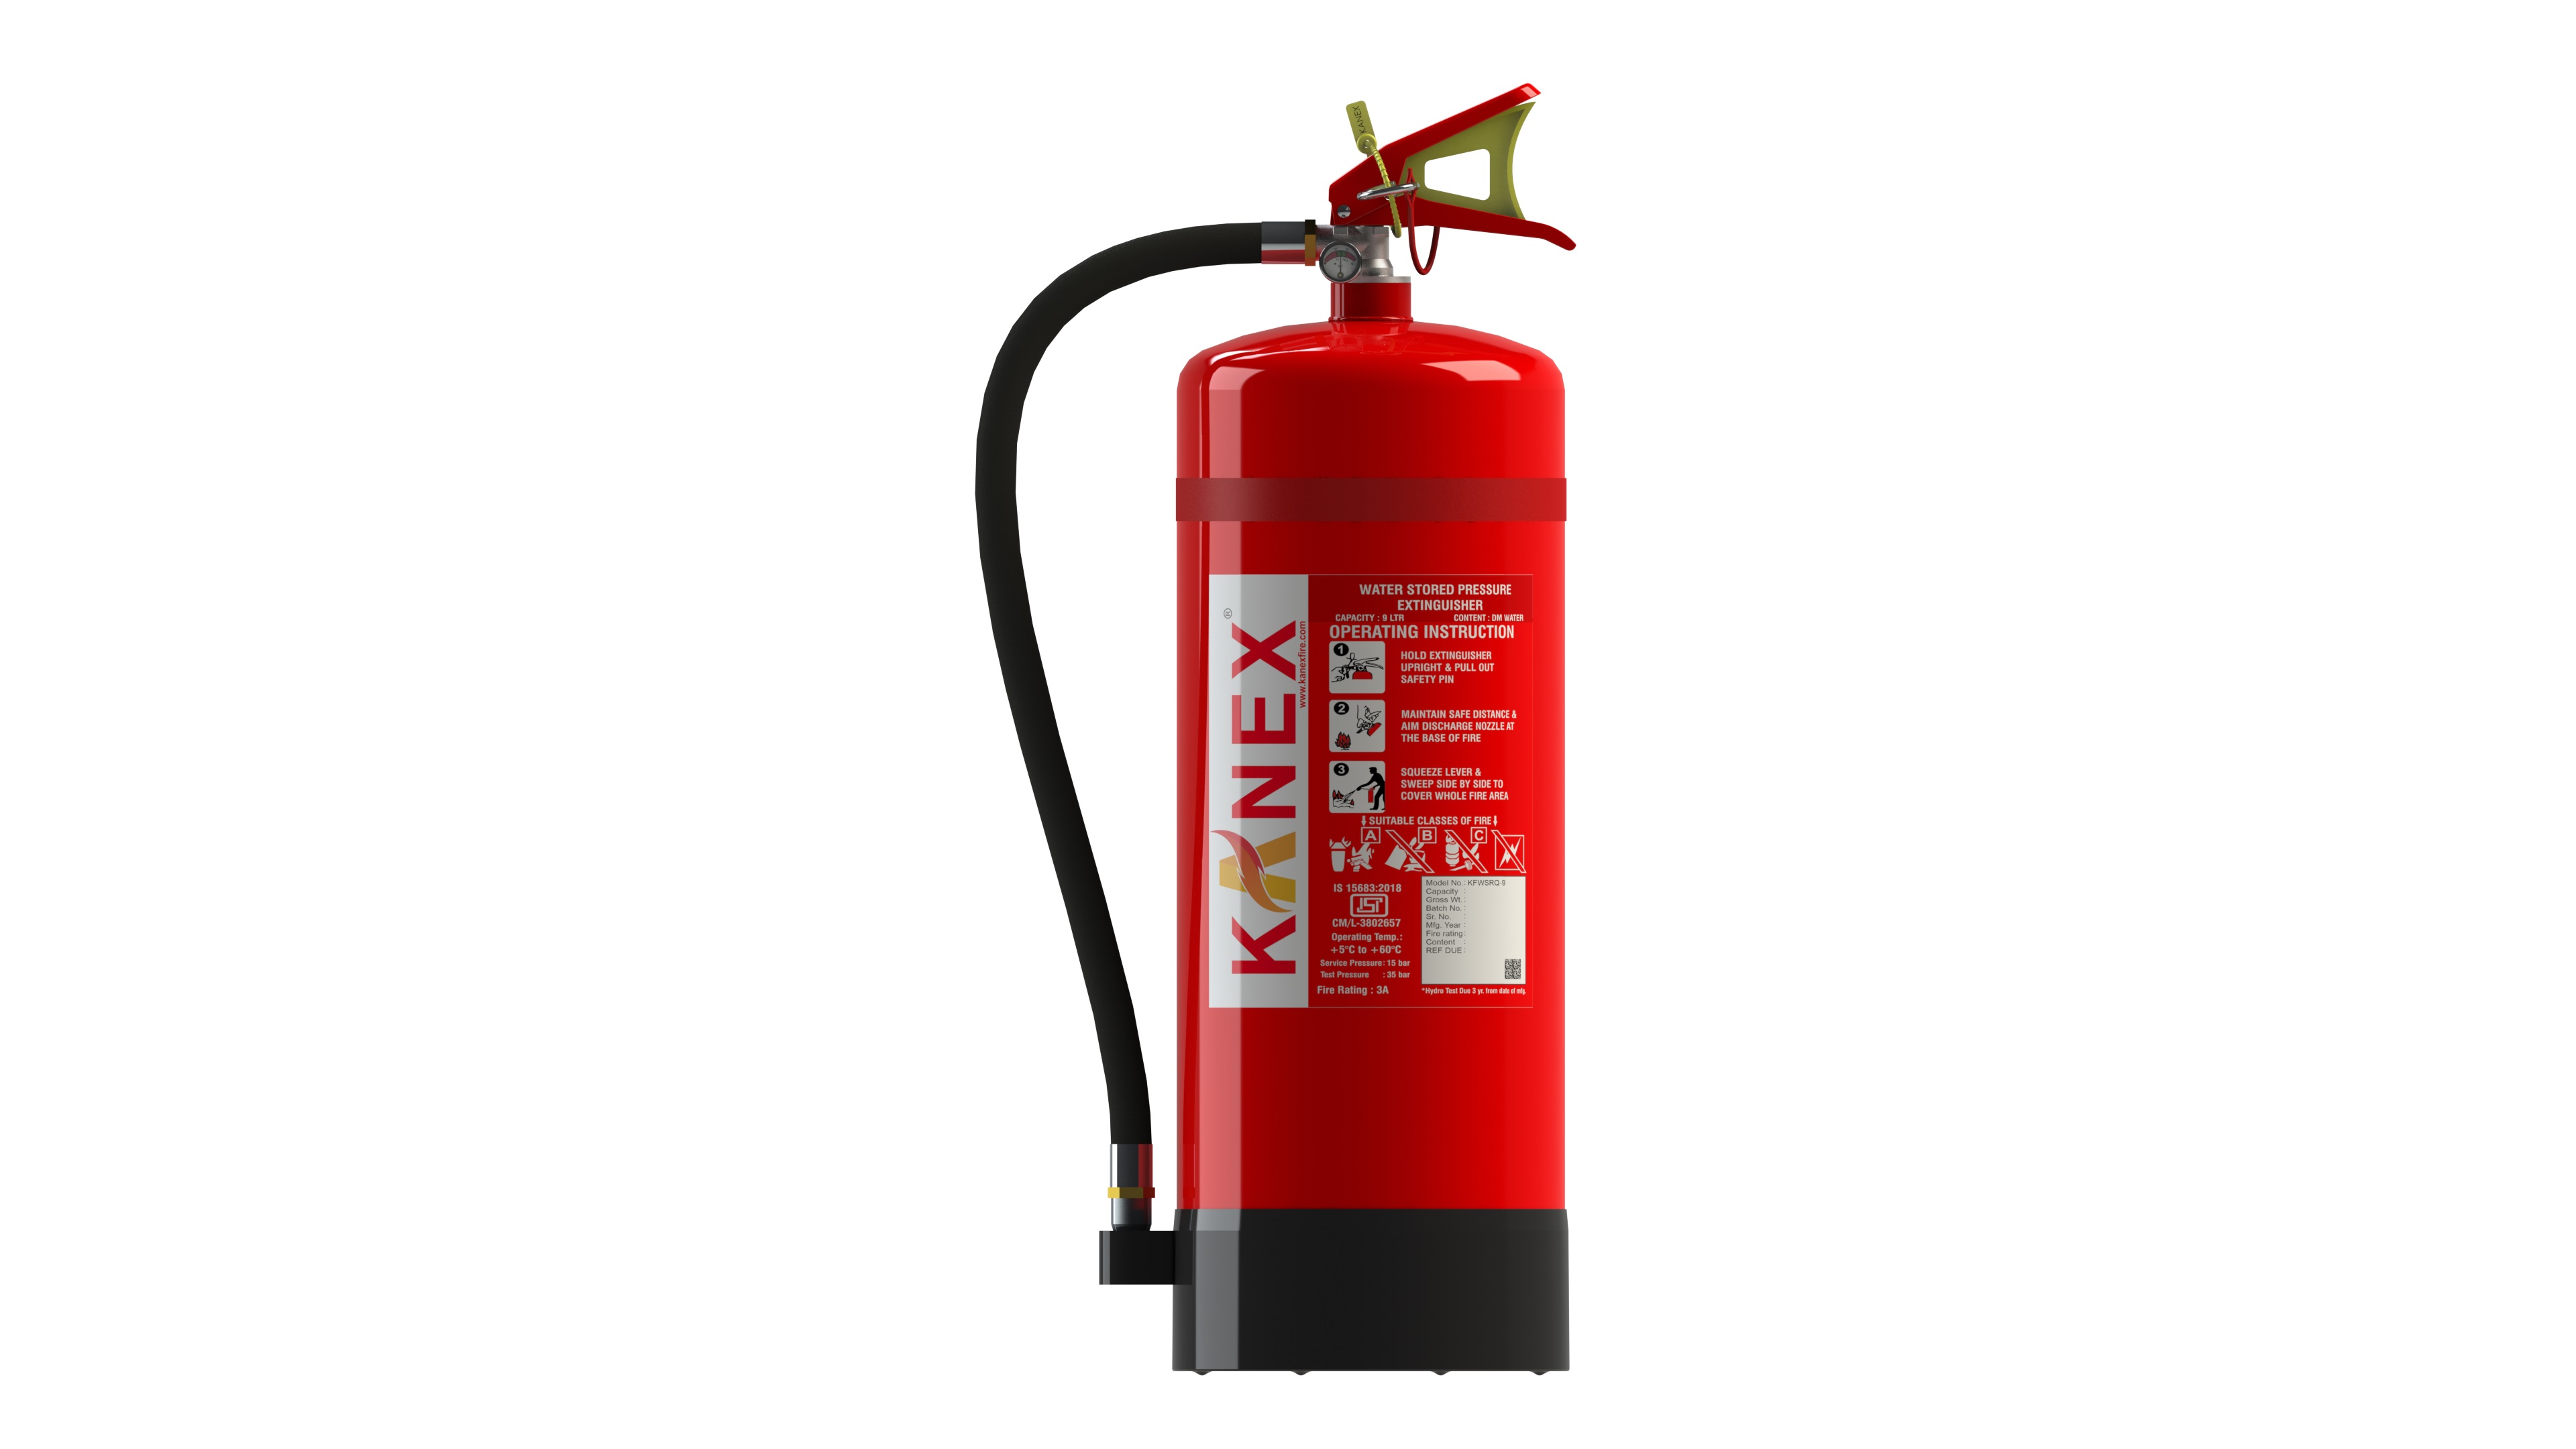 Buy KANEX 9 L Water (Red) Fire Extinguishers online at best rates in India